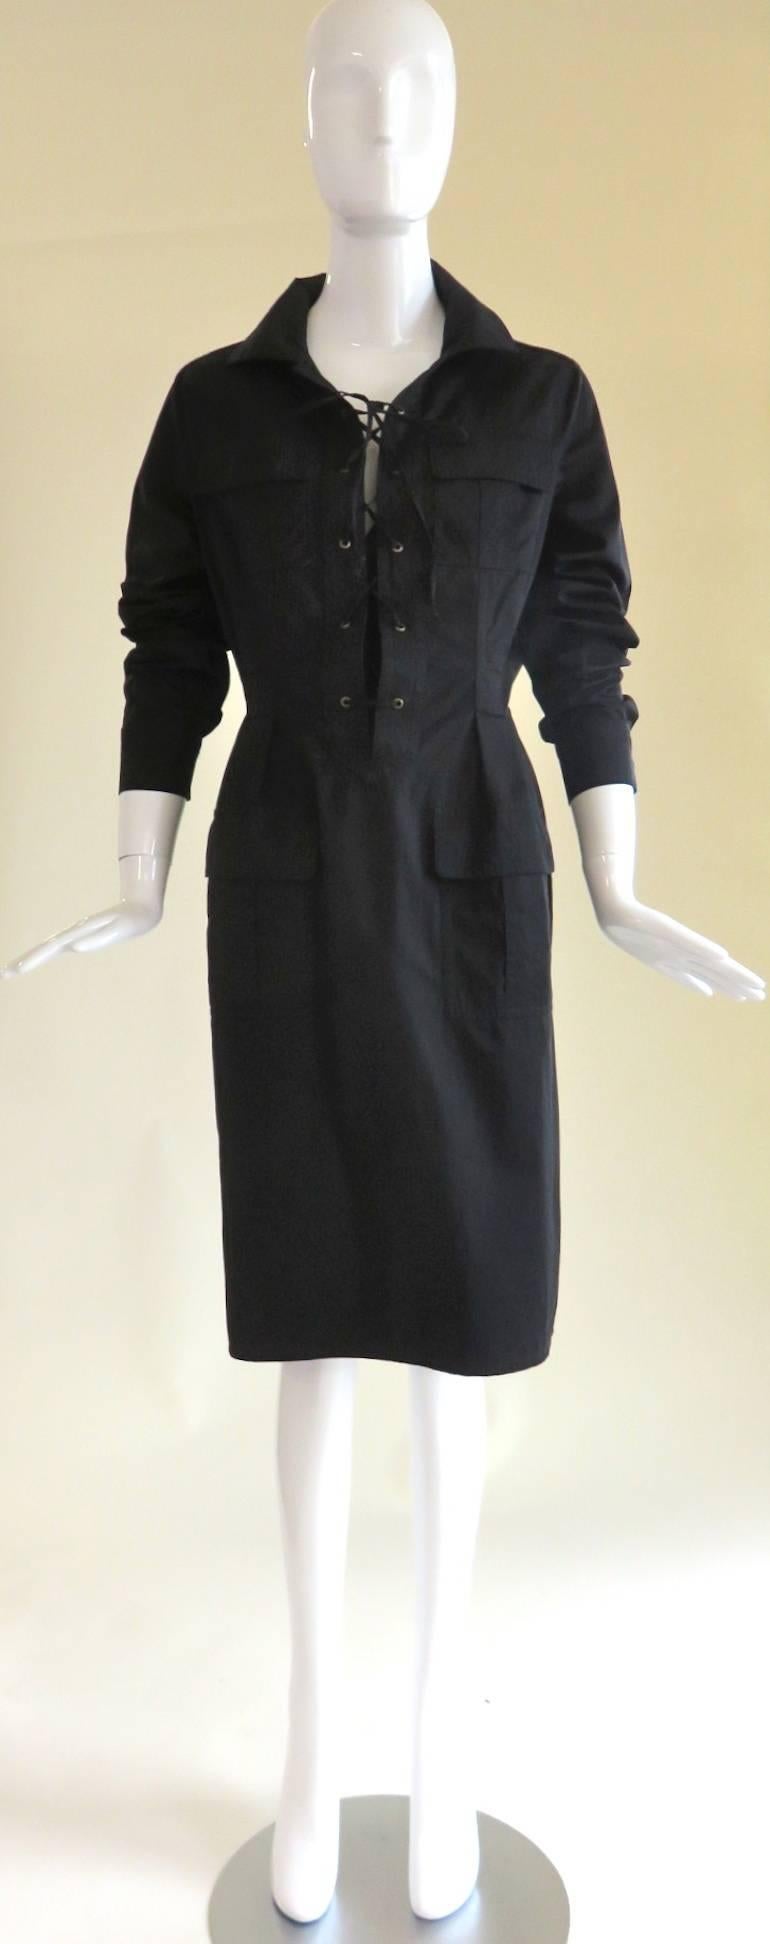 YVES SAINT LAURENT Tom Ford Black Cotton Safari Dress In Excellent Condition For Sale In Newport Beach, CA